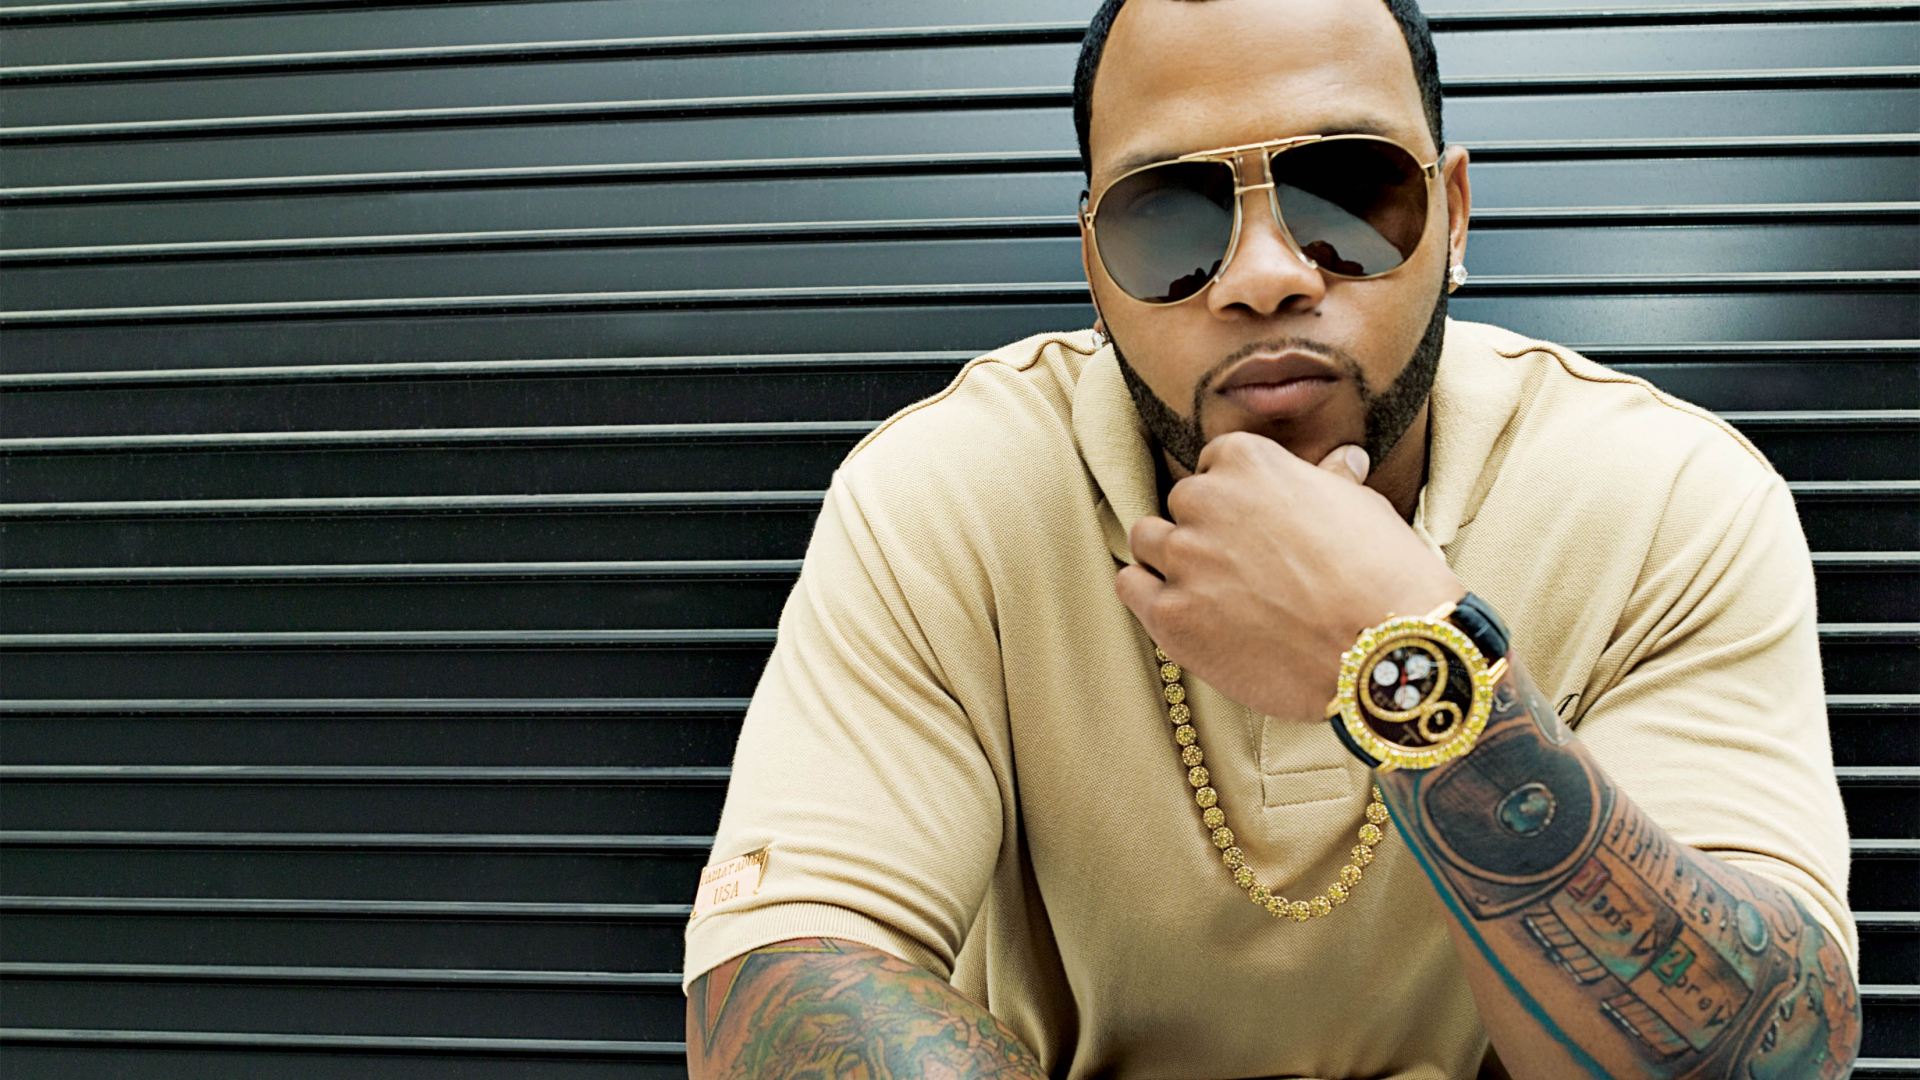 5 Flo Rida HD Wallpapers | Backgrounds - Wallpaper Abyss